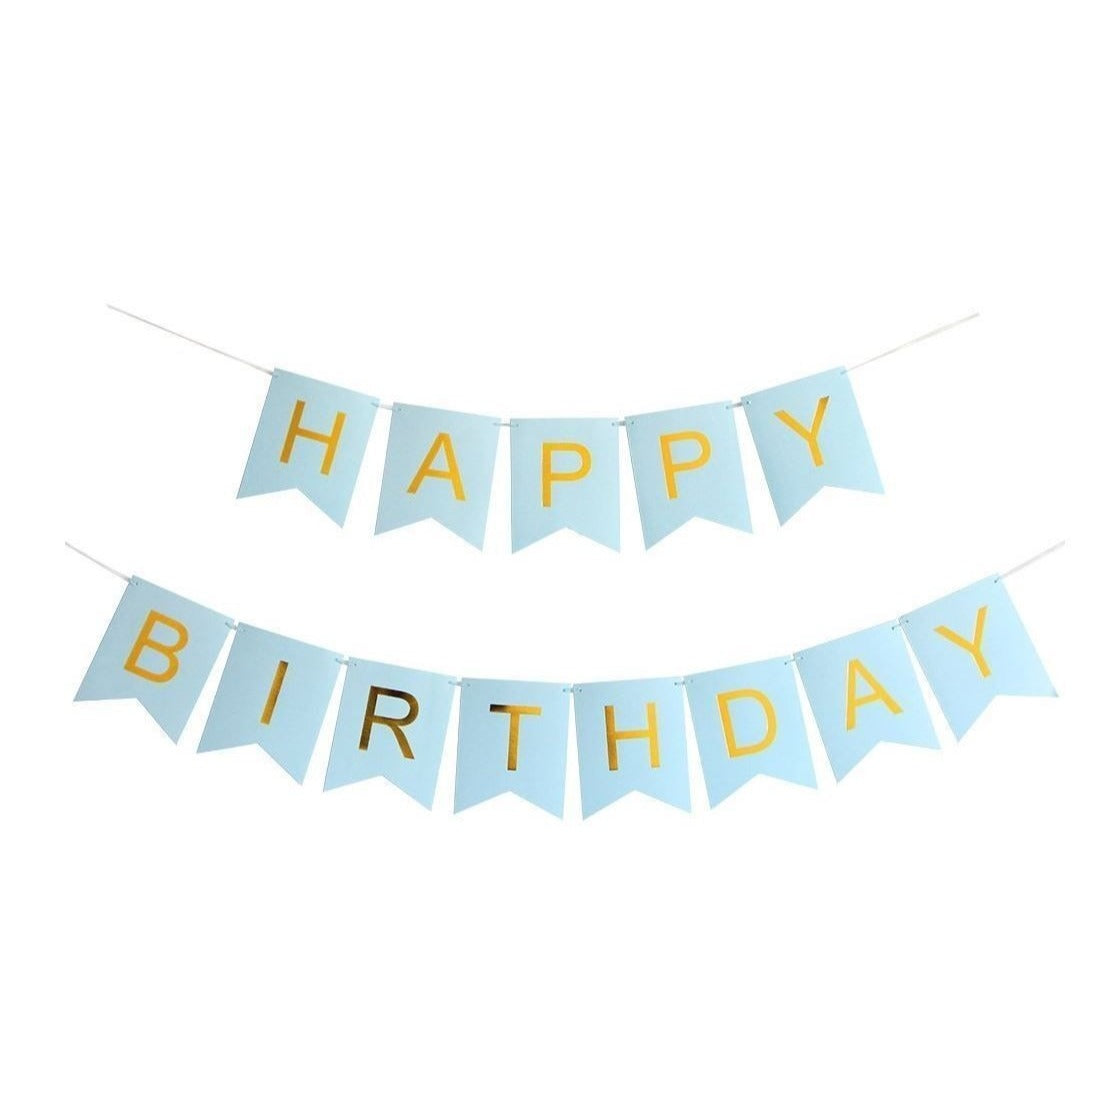 Blue Happy Birthday Banner - Chic Garland - Blue with Gold Foil Lettering & Pom Poms